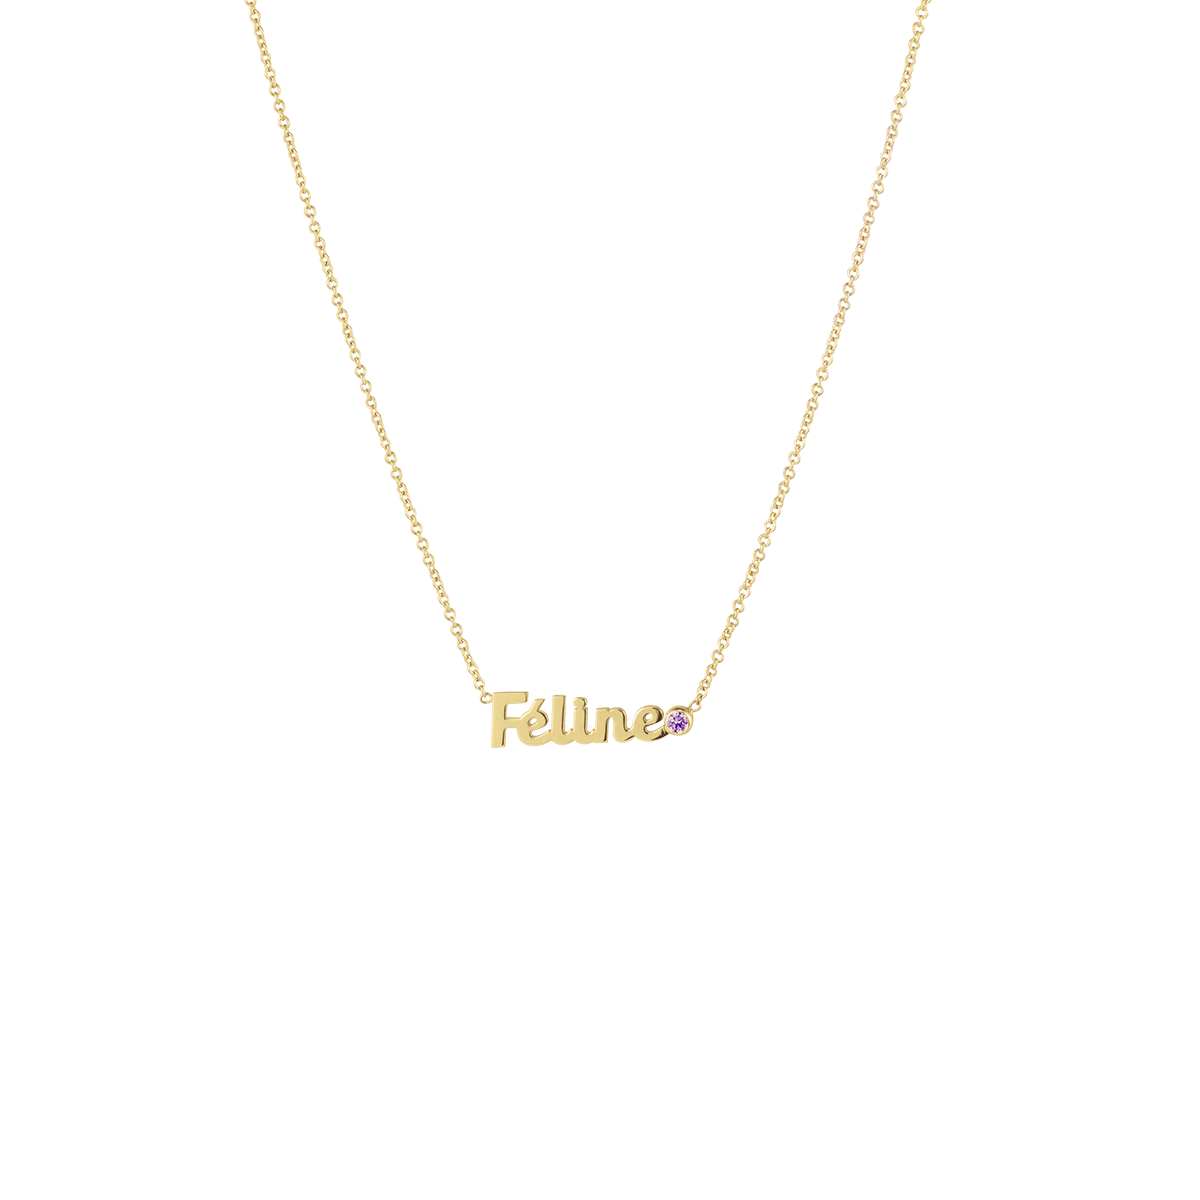 Name Birthstone Necklace Deluxe